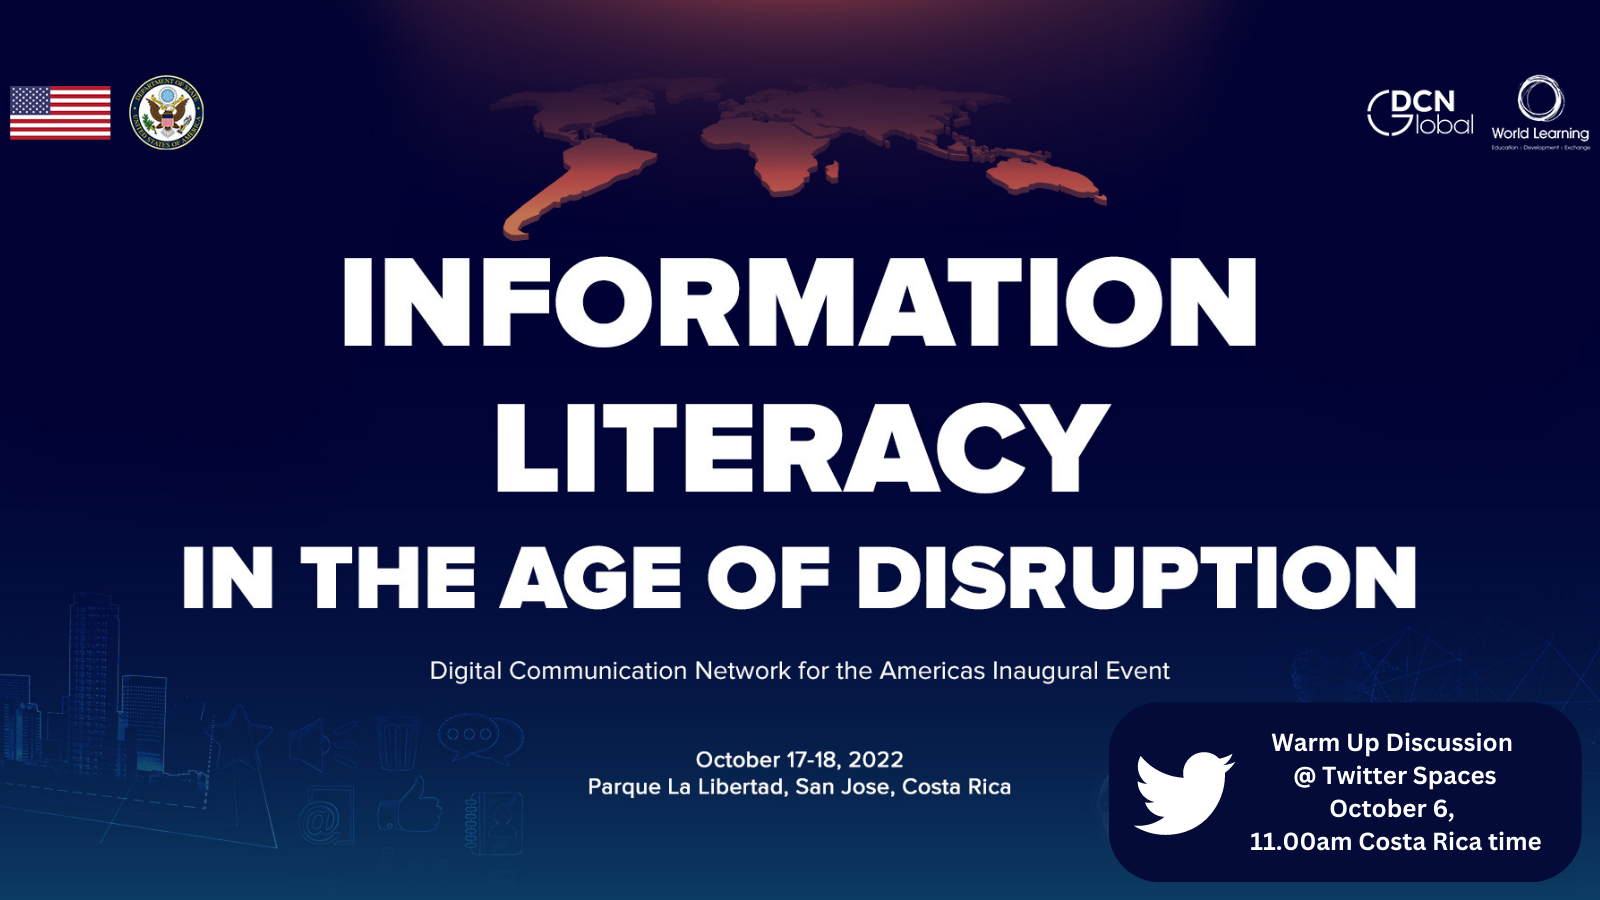 Twitter Spaces Discussion: Information Literacy in the Age of Disruption